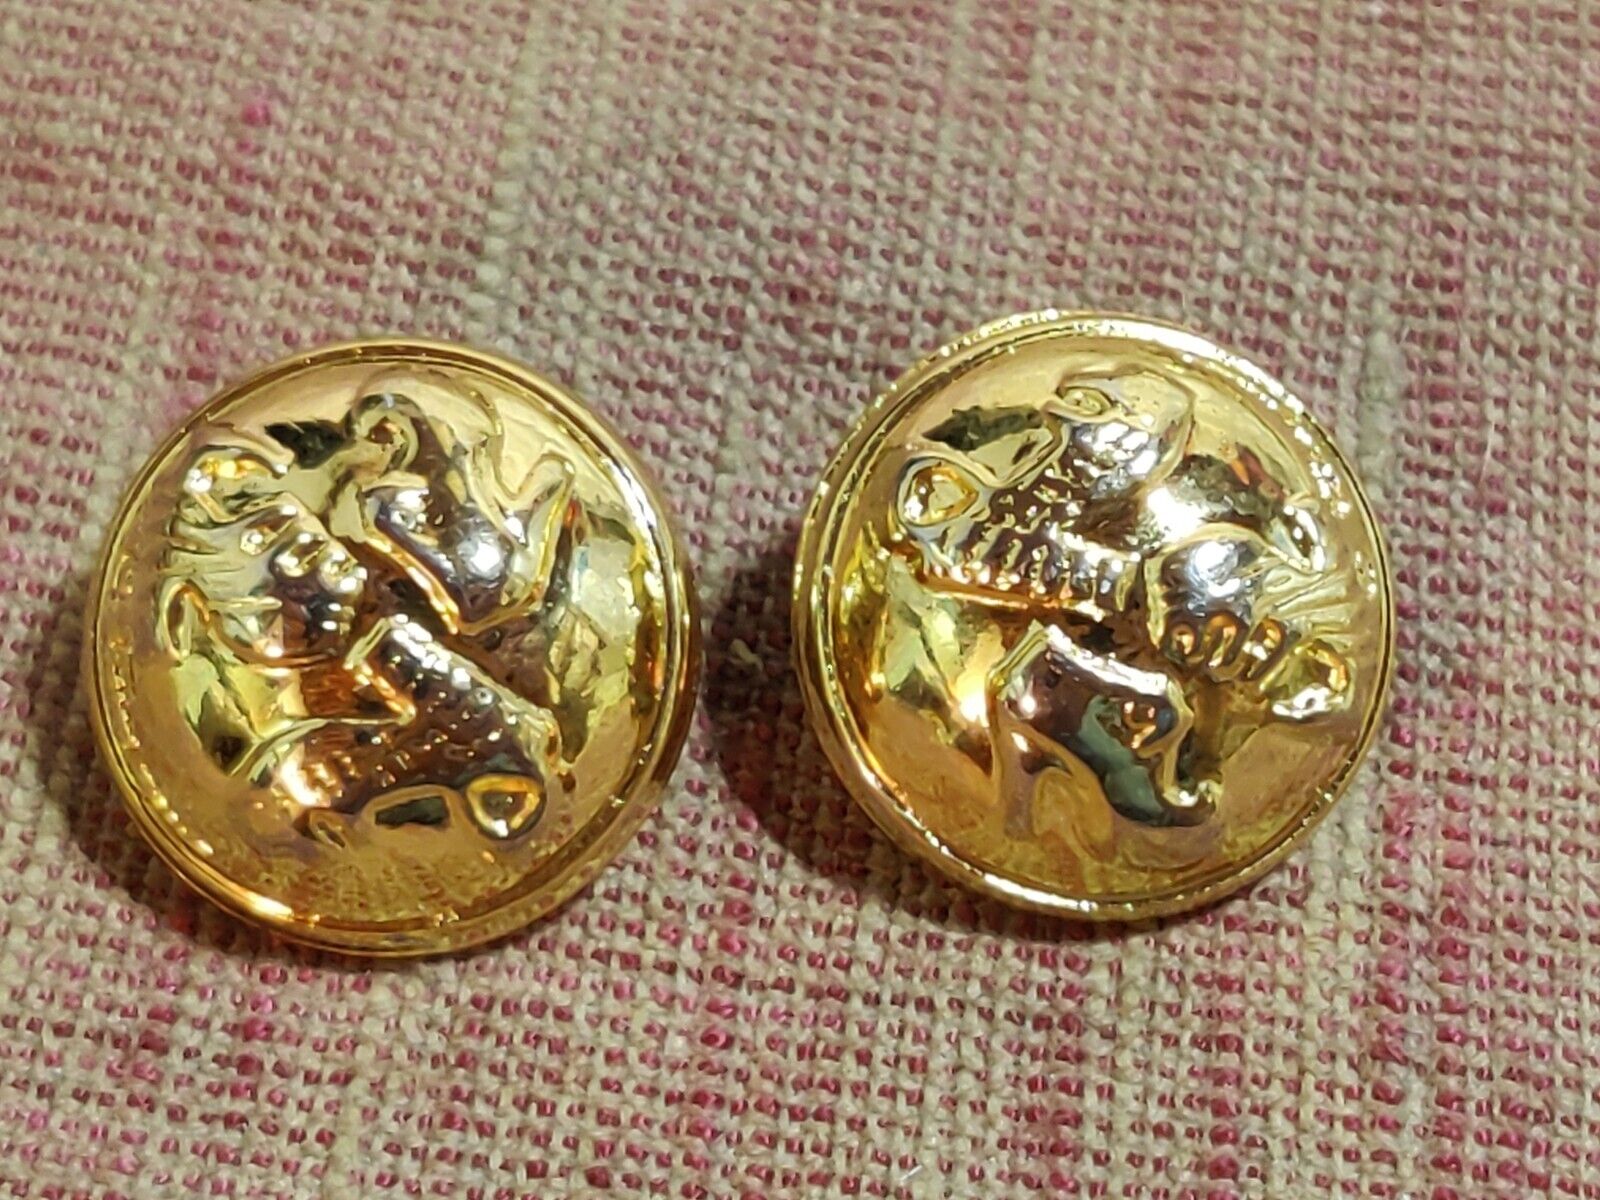 Pair of Vintage Salvatore Ferragamo Gold Plated Buttons - 3 Shoes Design Signed